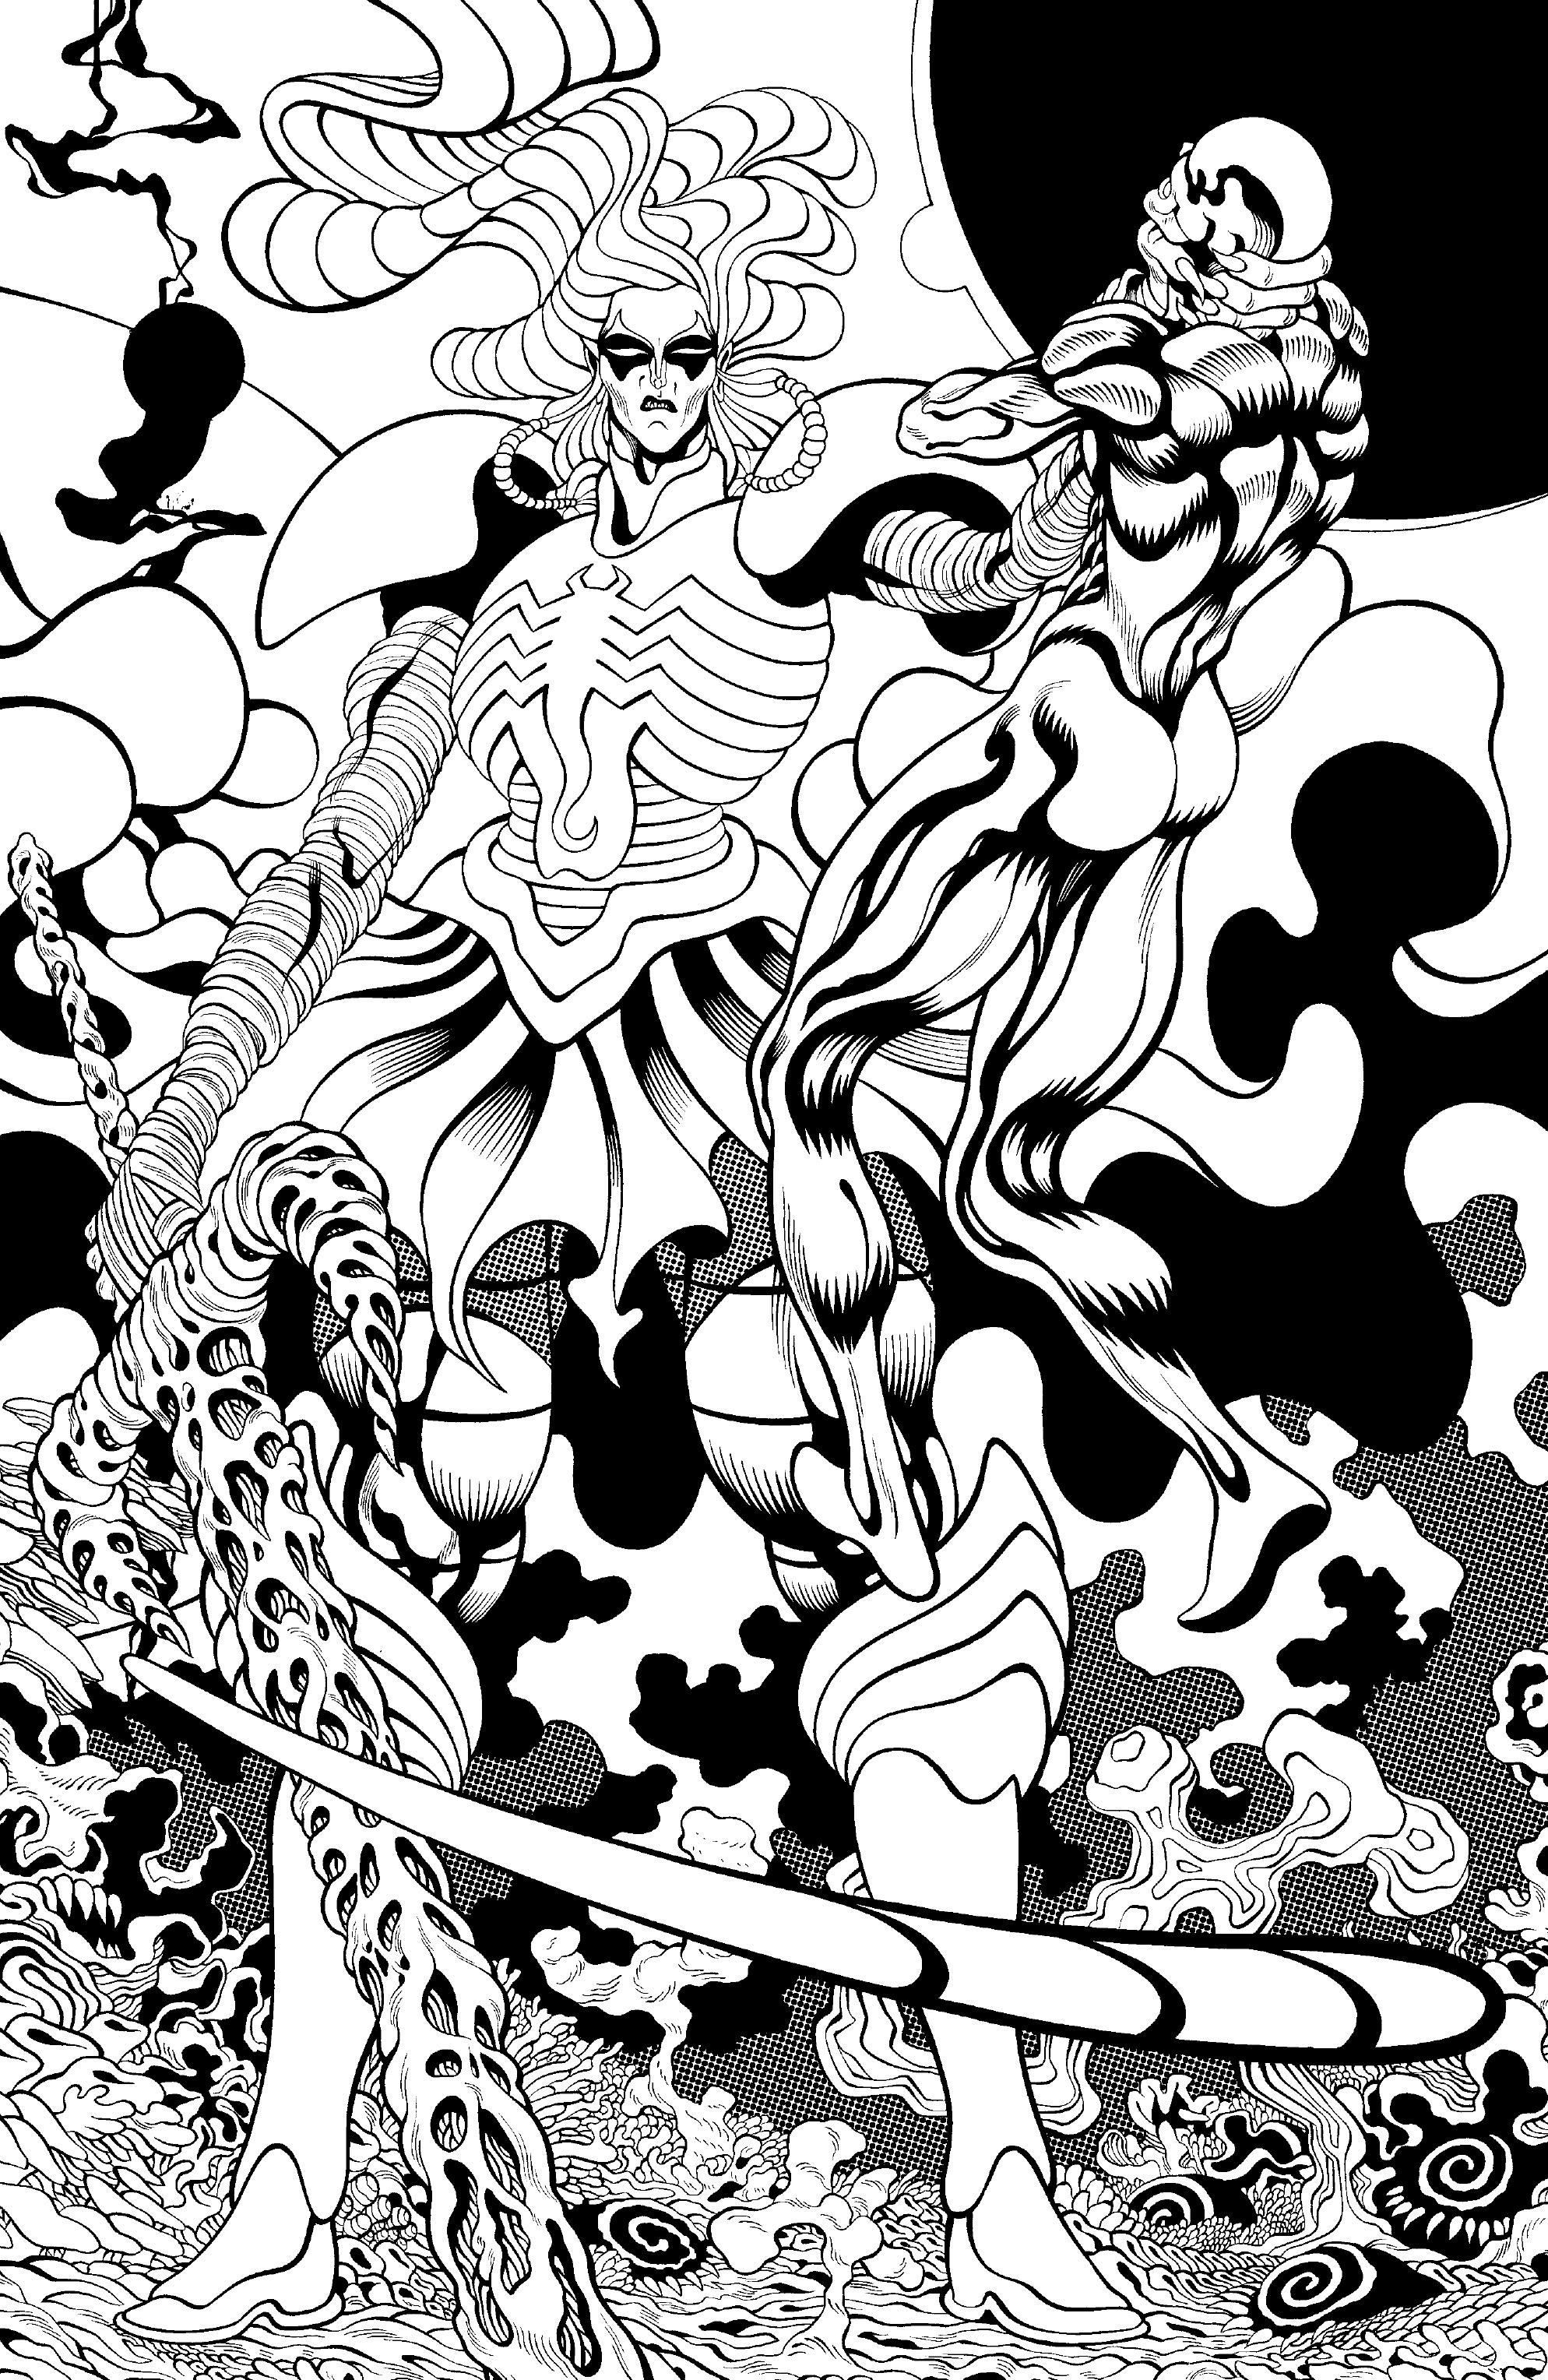 Read online Silver Surfer: Black comic -  Issue # _Director_s_Cut - 106